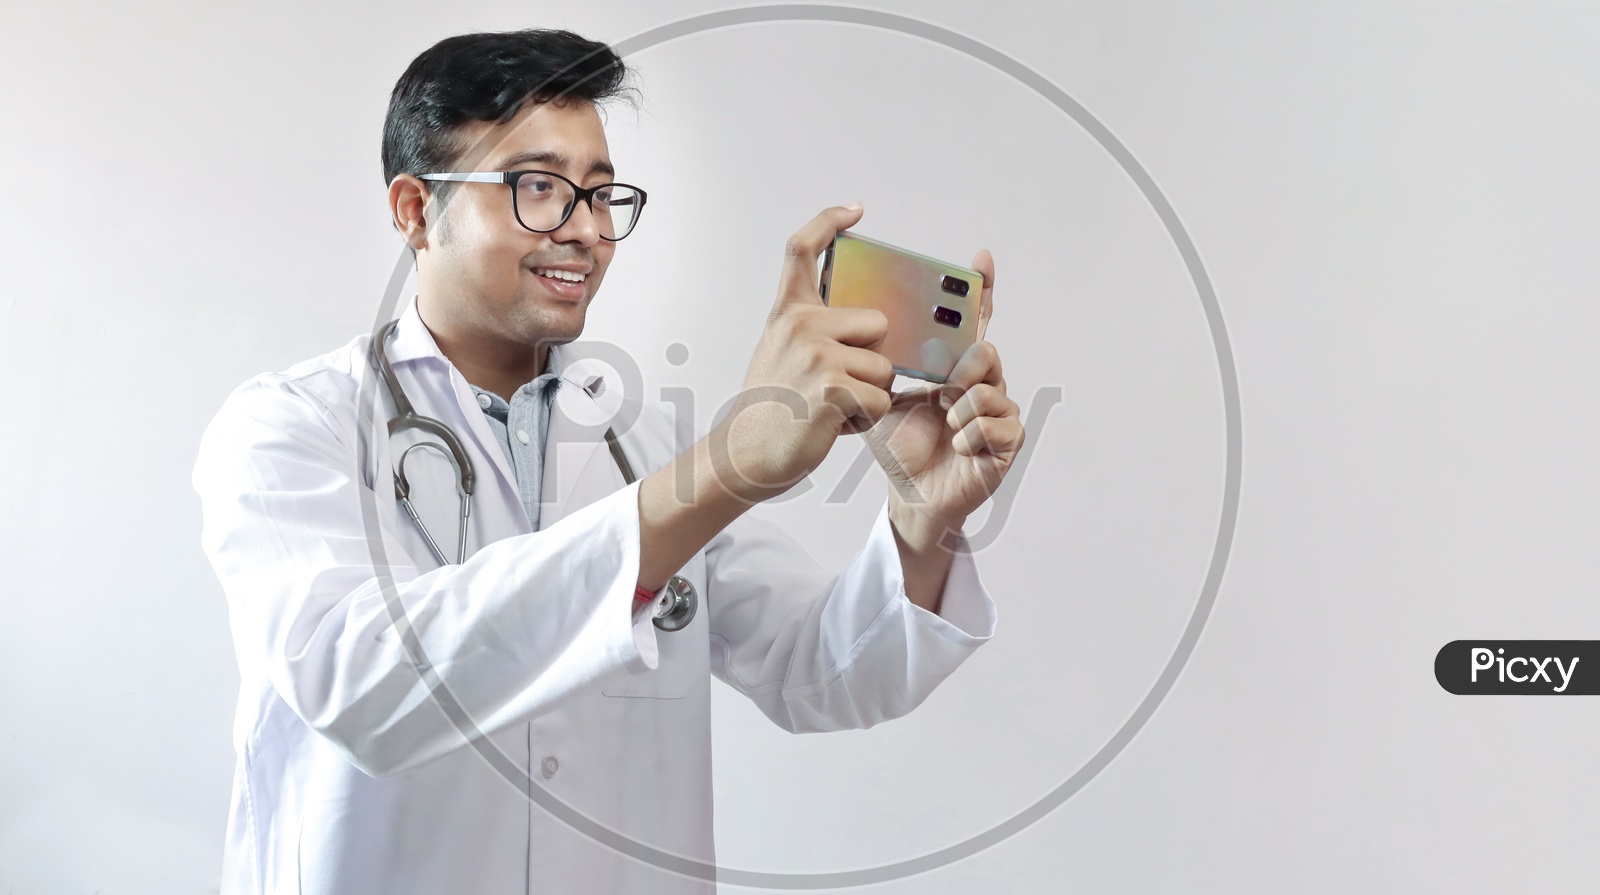 Male Indian Doctor In White Coat And Stethoscope Clicking Photo With A Mobile Tripod And Futuristic Concept Cameraphone